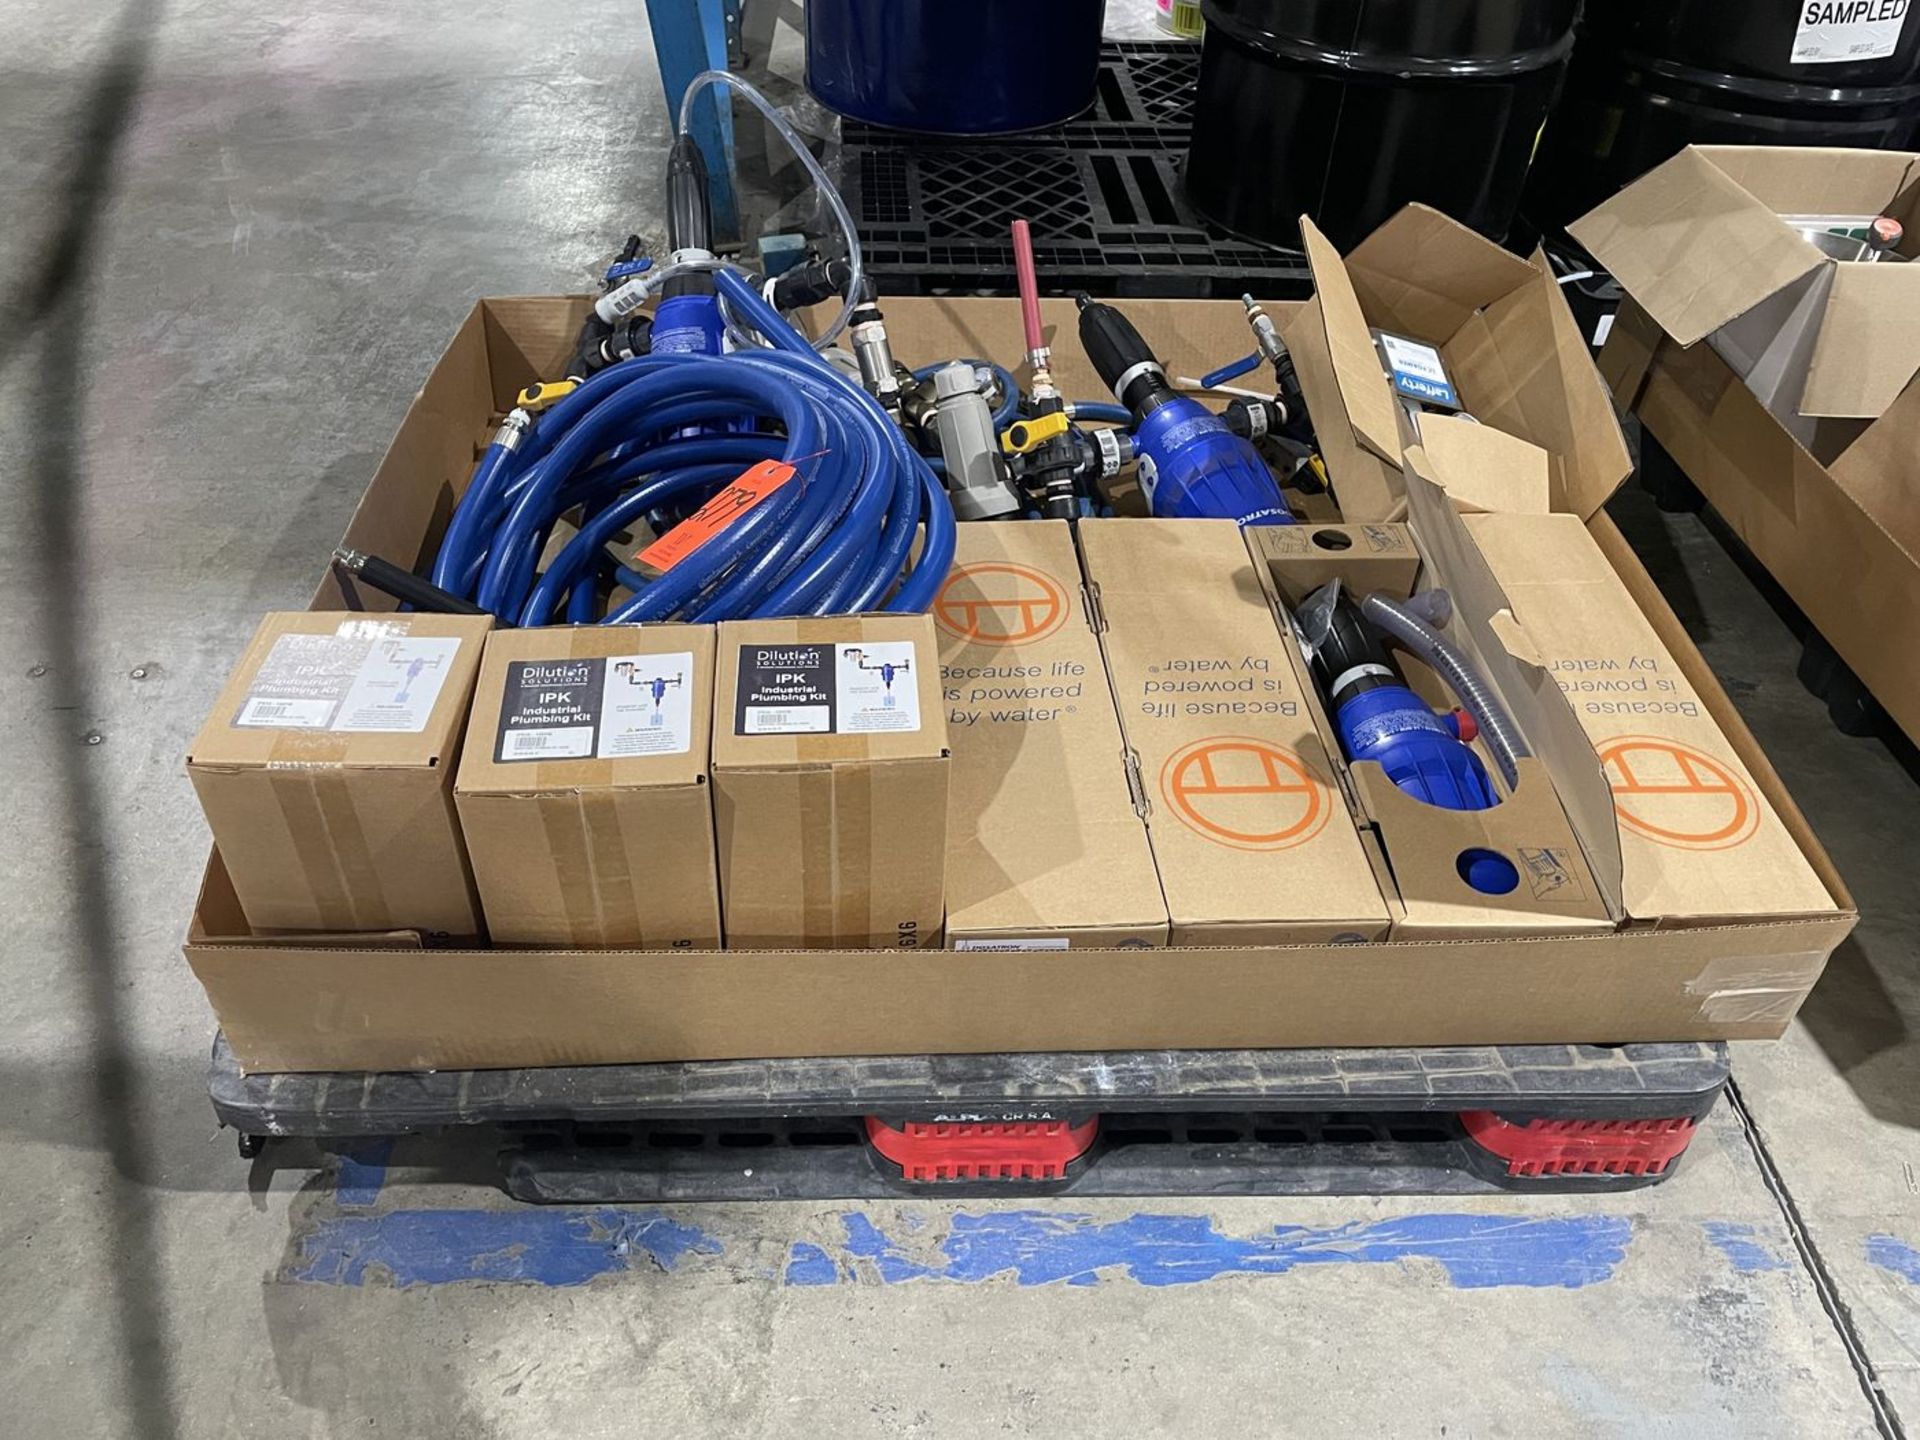 Lot - Pallet to Include: (3) Dilution IPK Industrial Plumbing Kits, (6) Dosatron 14 GPM Industrial